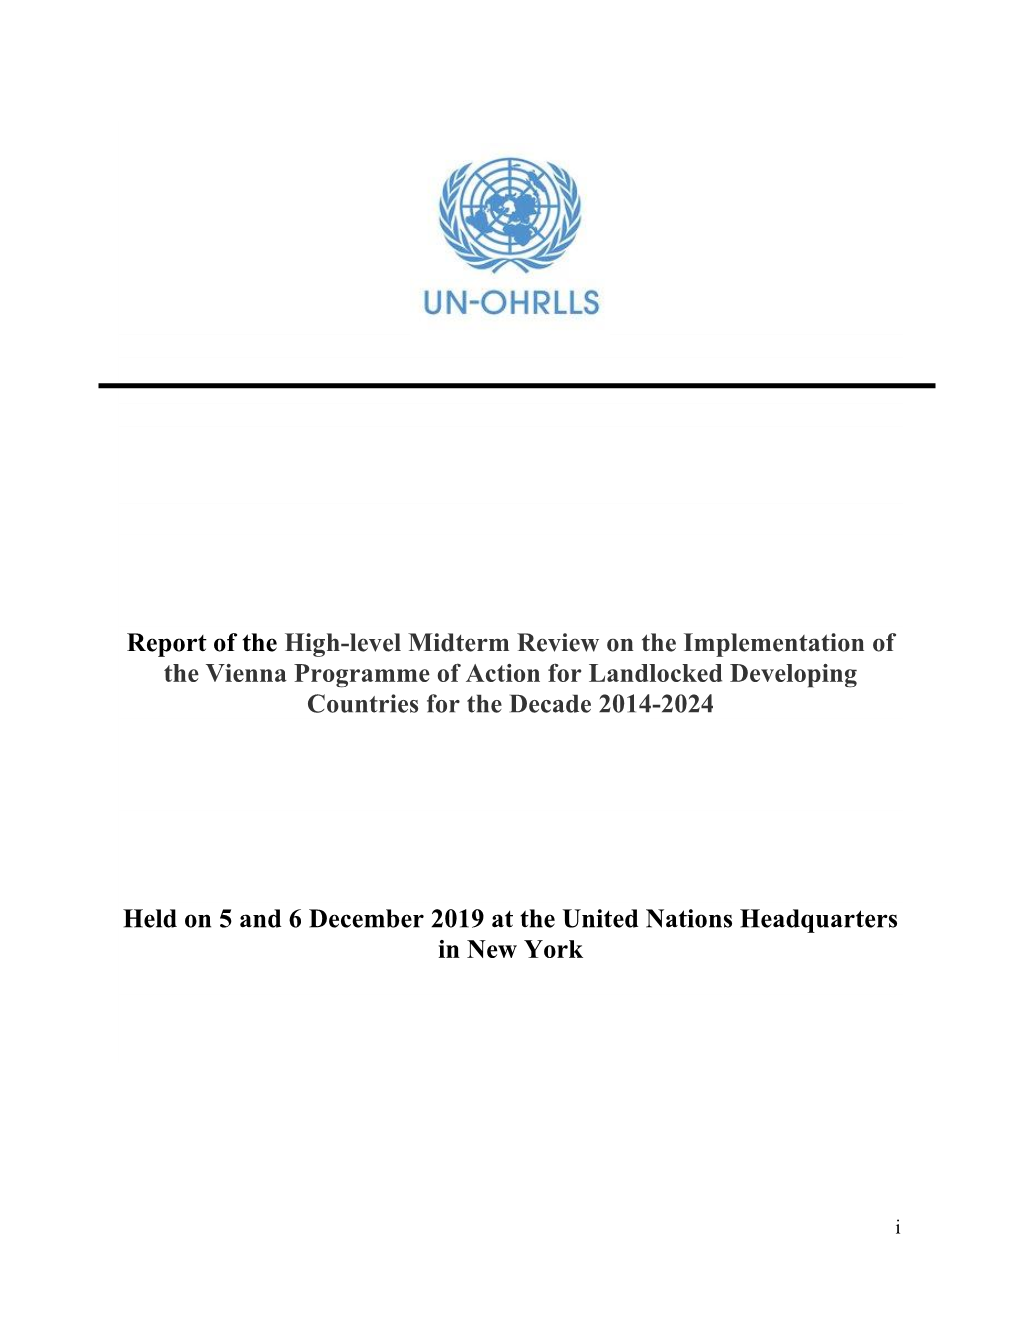 Summary Report of the High-Level Midterm Review of the Vienna Programme of Action for Lldcs